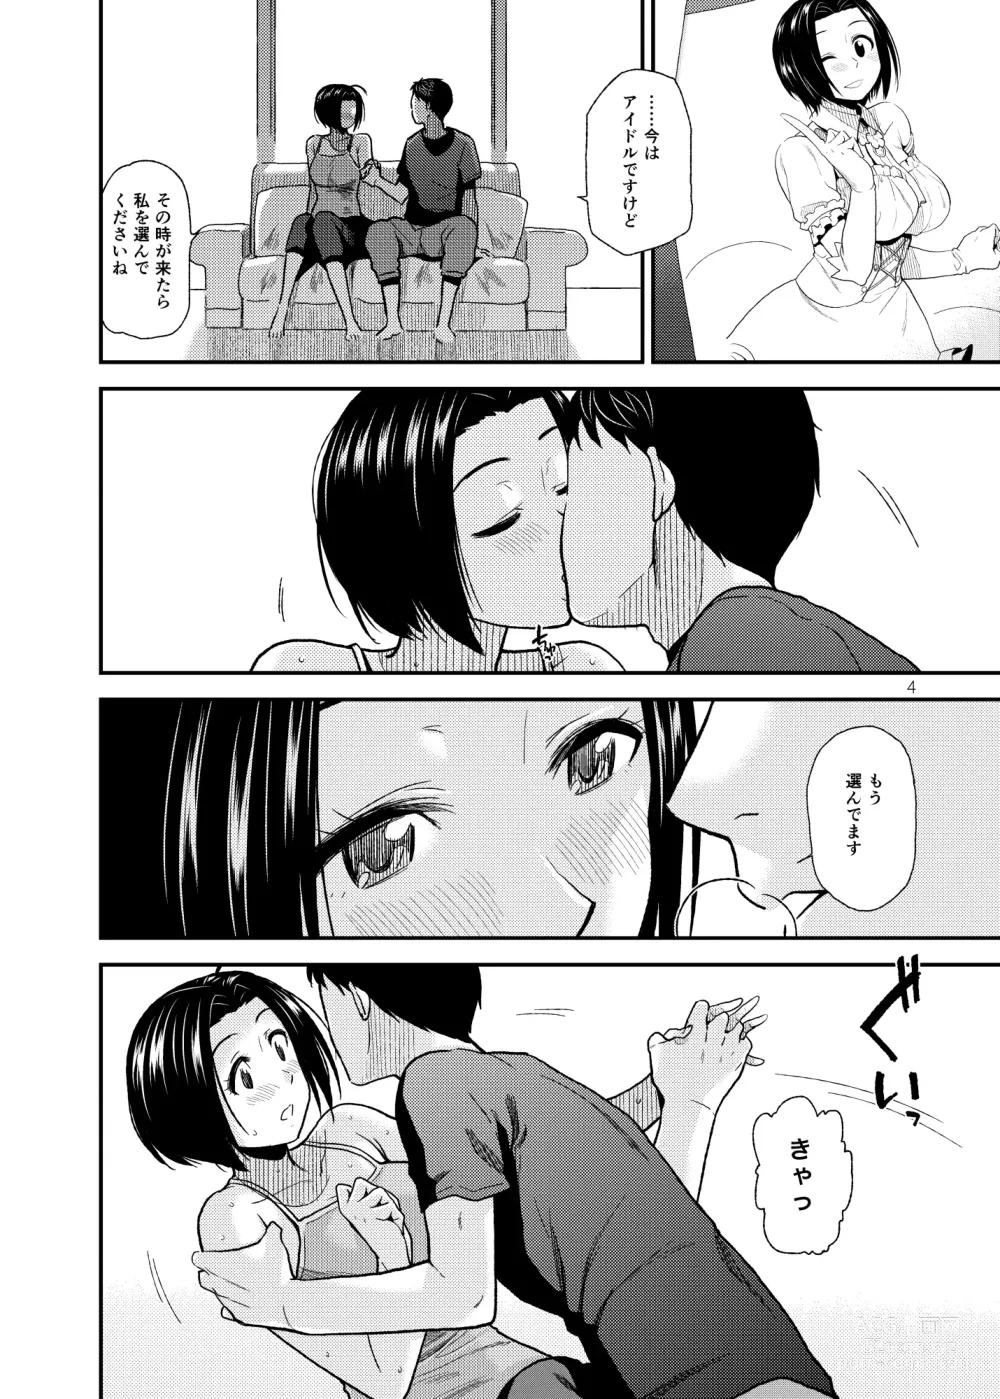 Page 5 of doujinshi Tender Time 2